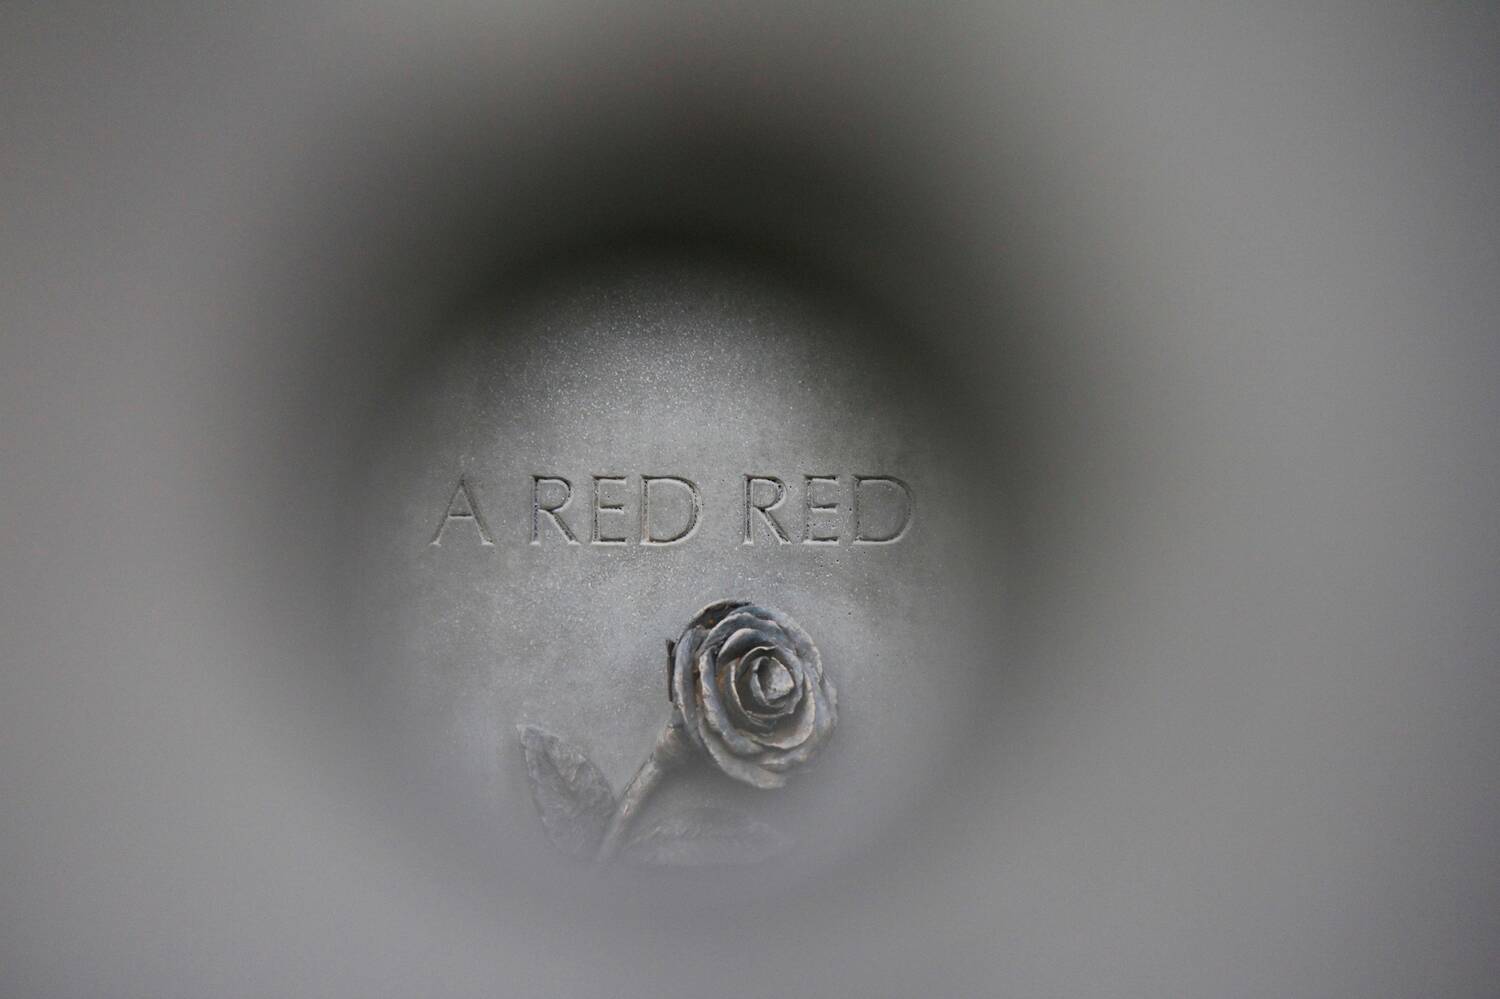 A stone carving of a rose, with the title of A red red above